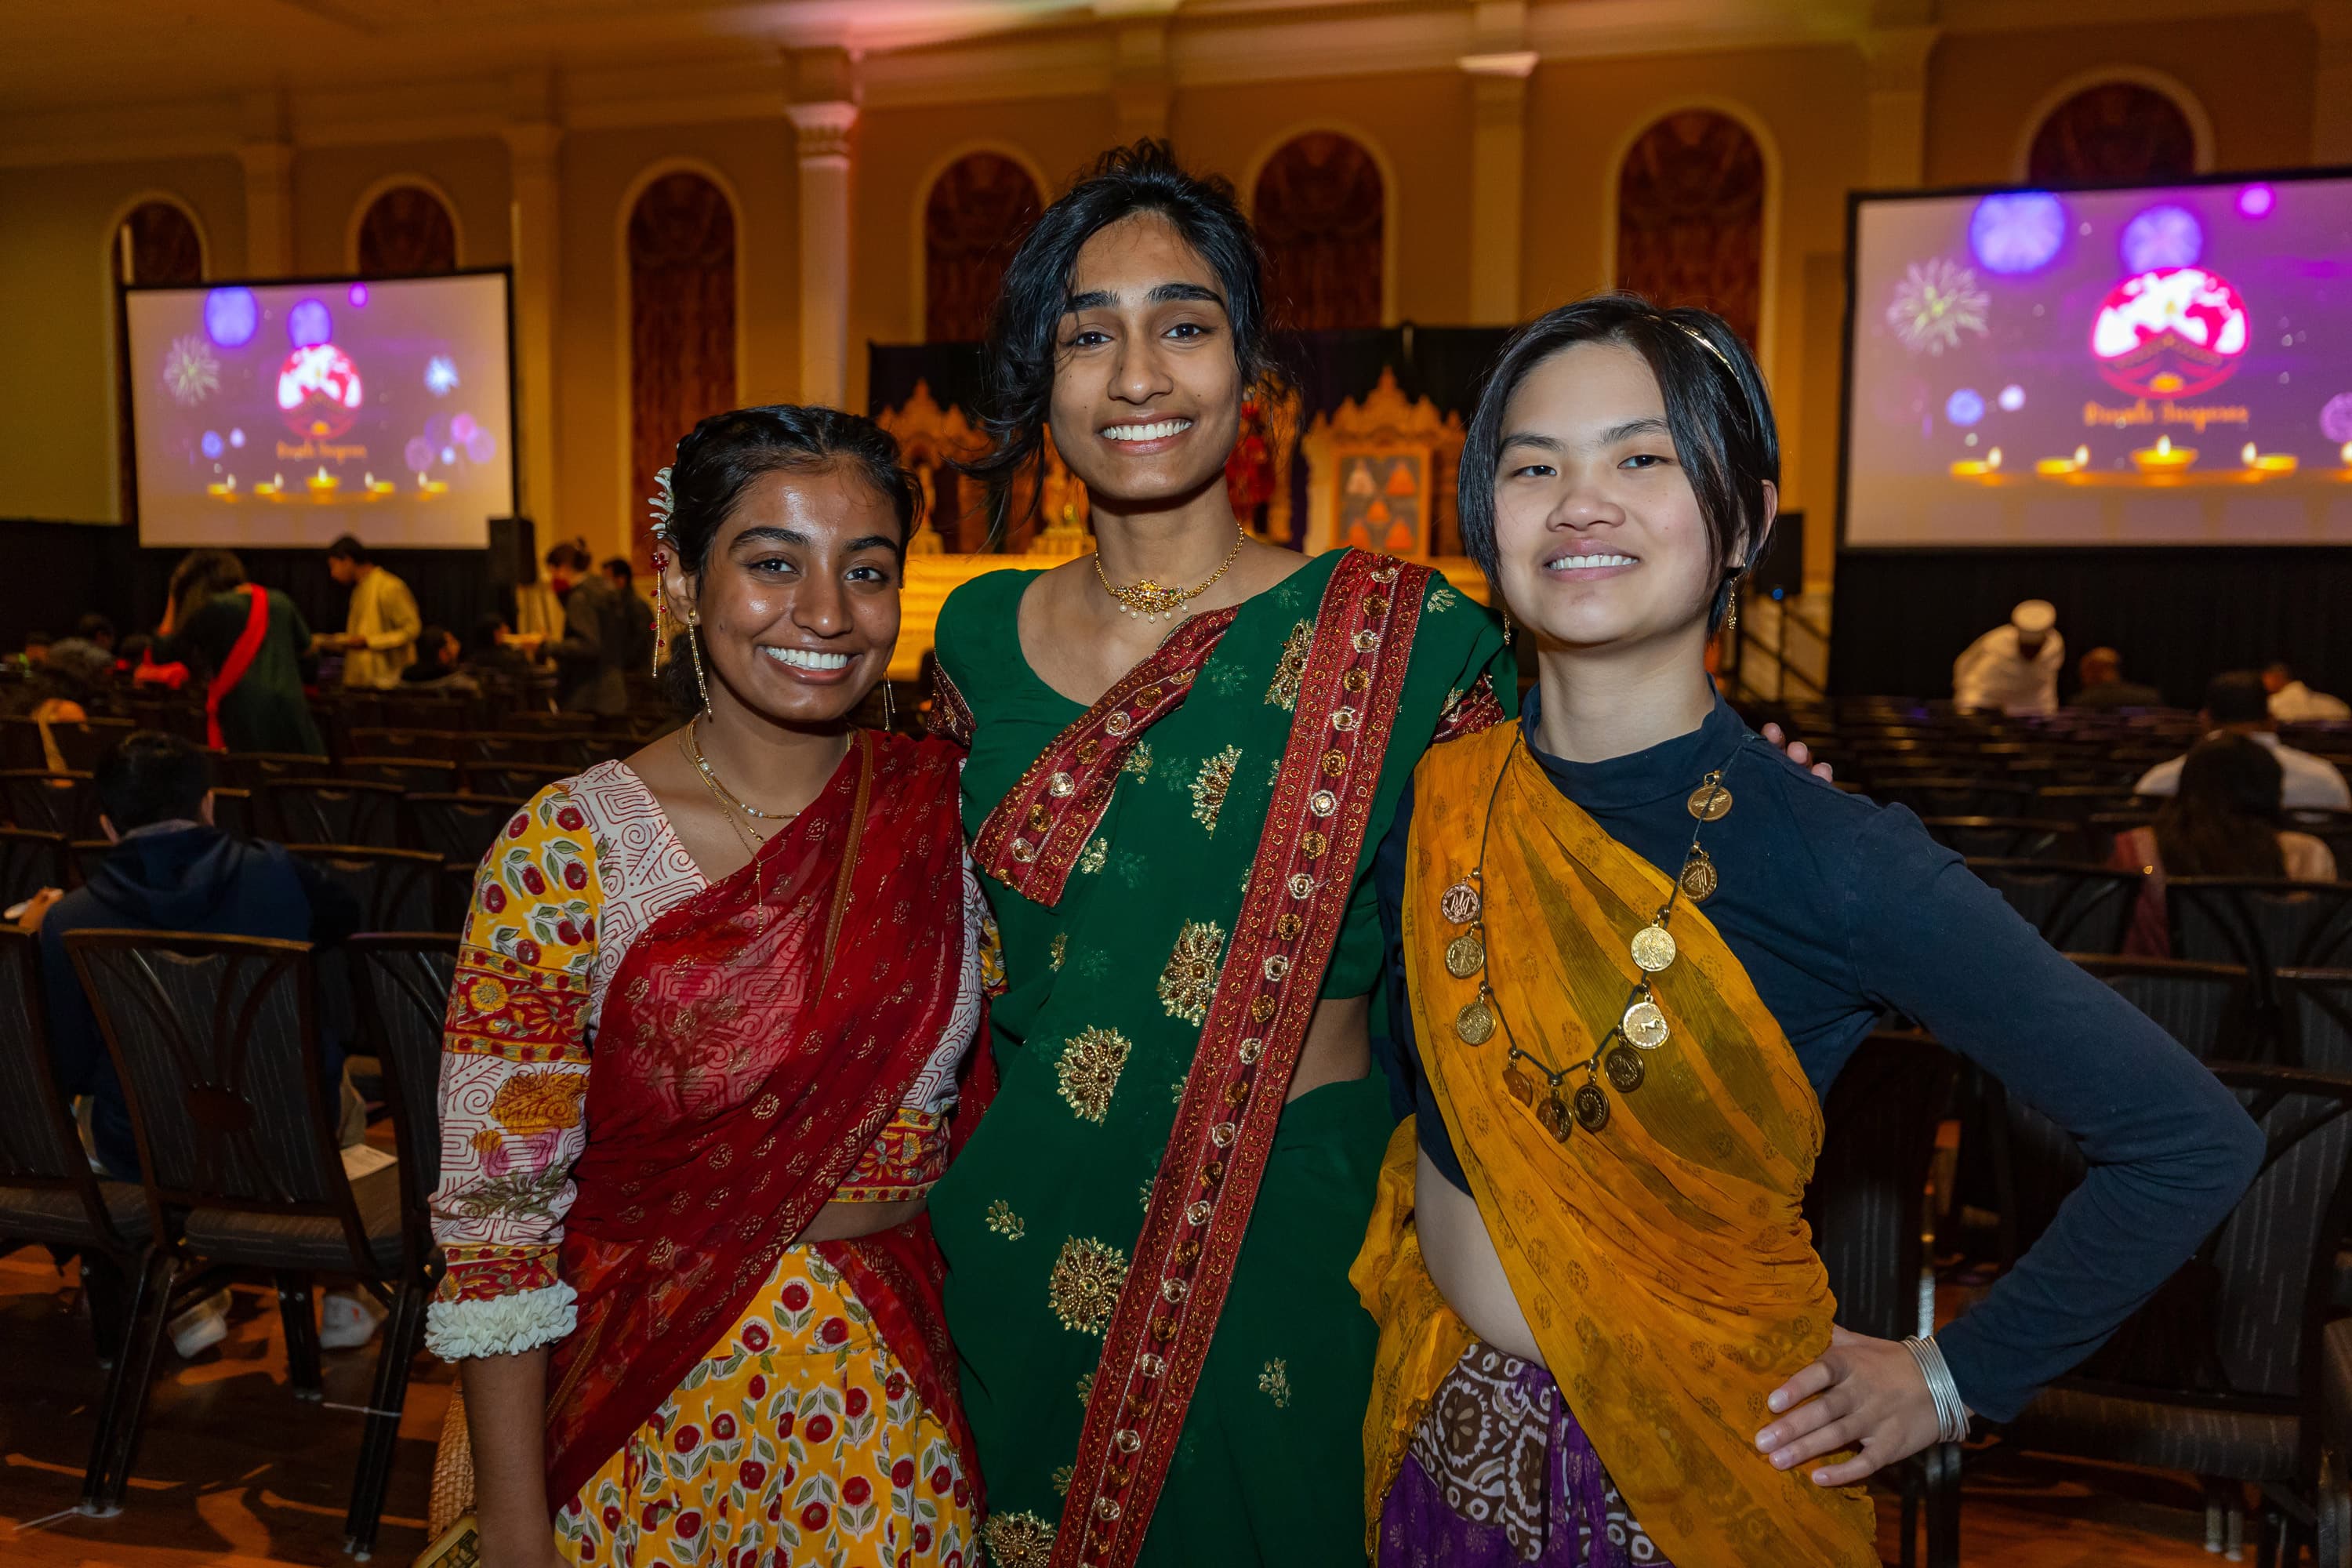 Three women in traditional Indian clothing